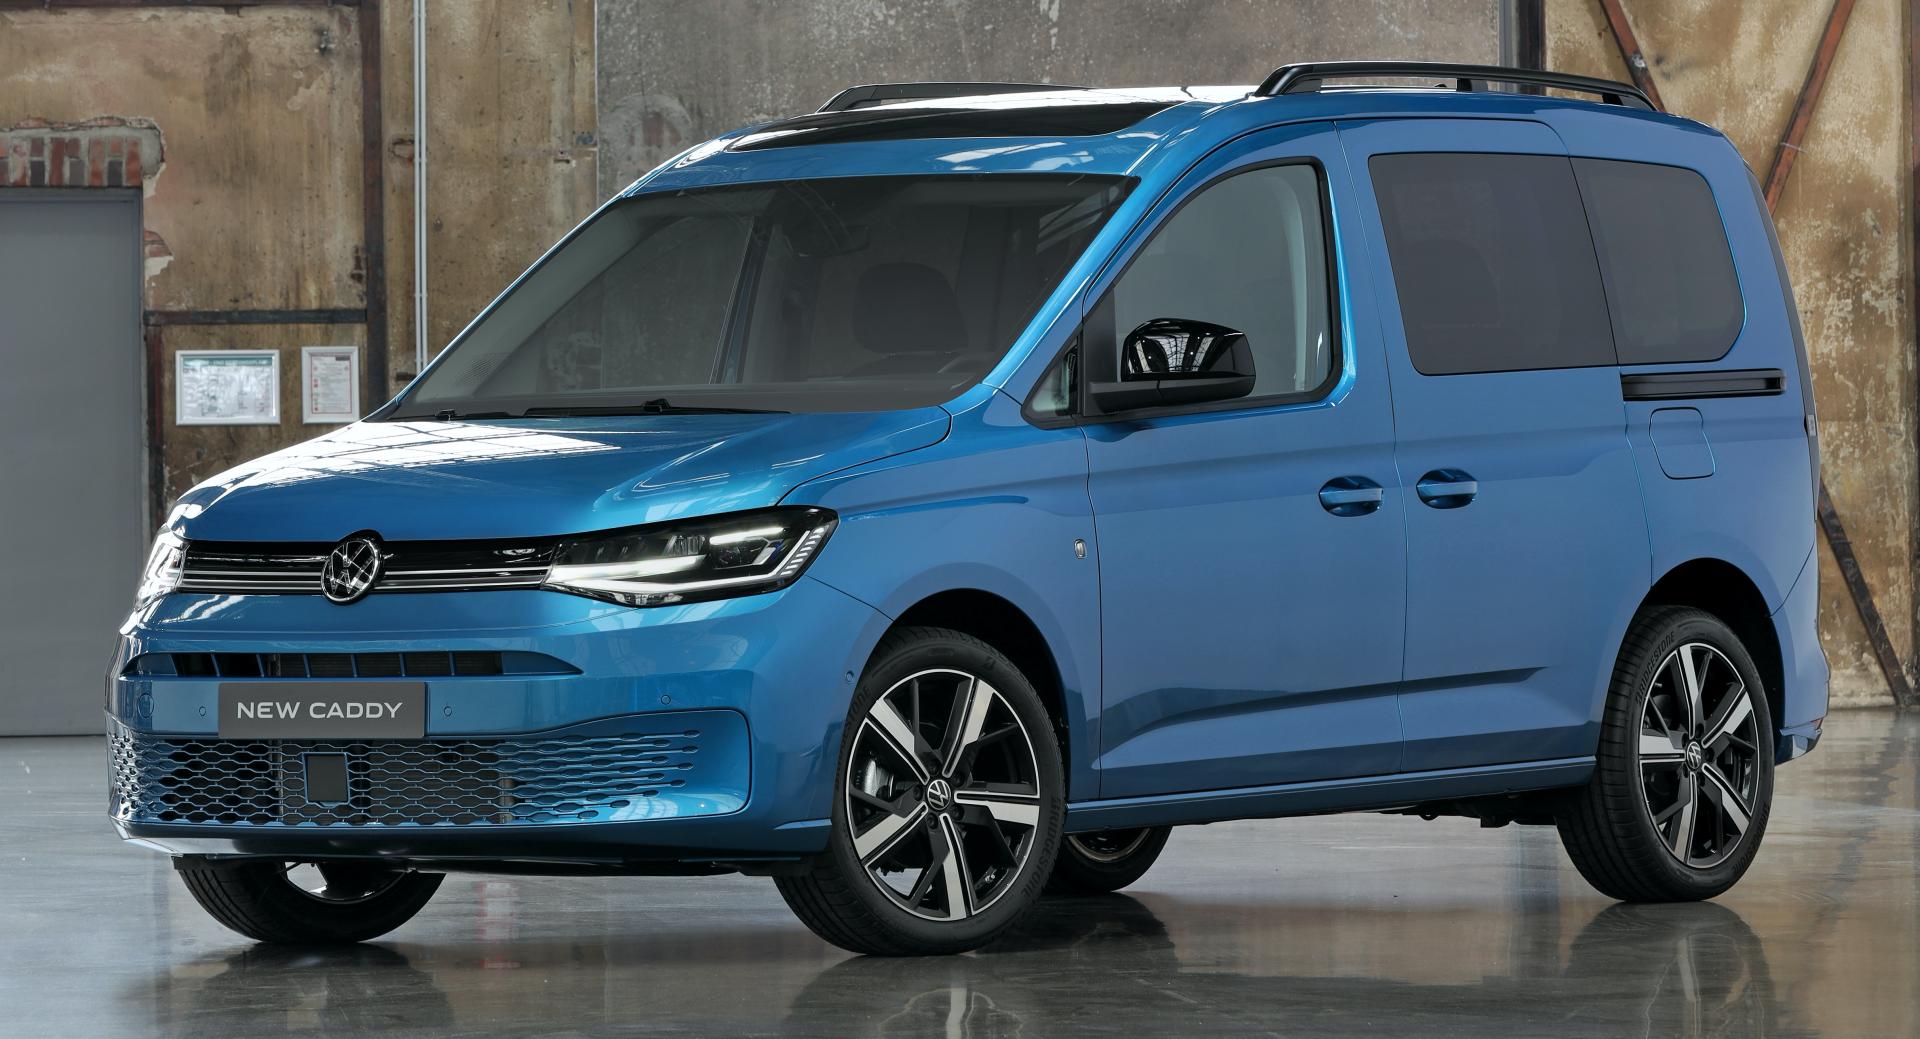 New 2021 VW Caddy Wraps MQB Underpinnings In Evolutionary Styling (60  Photos)